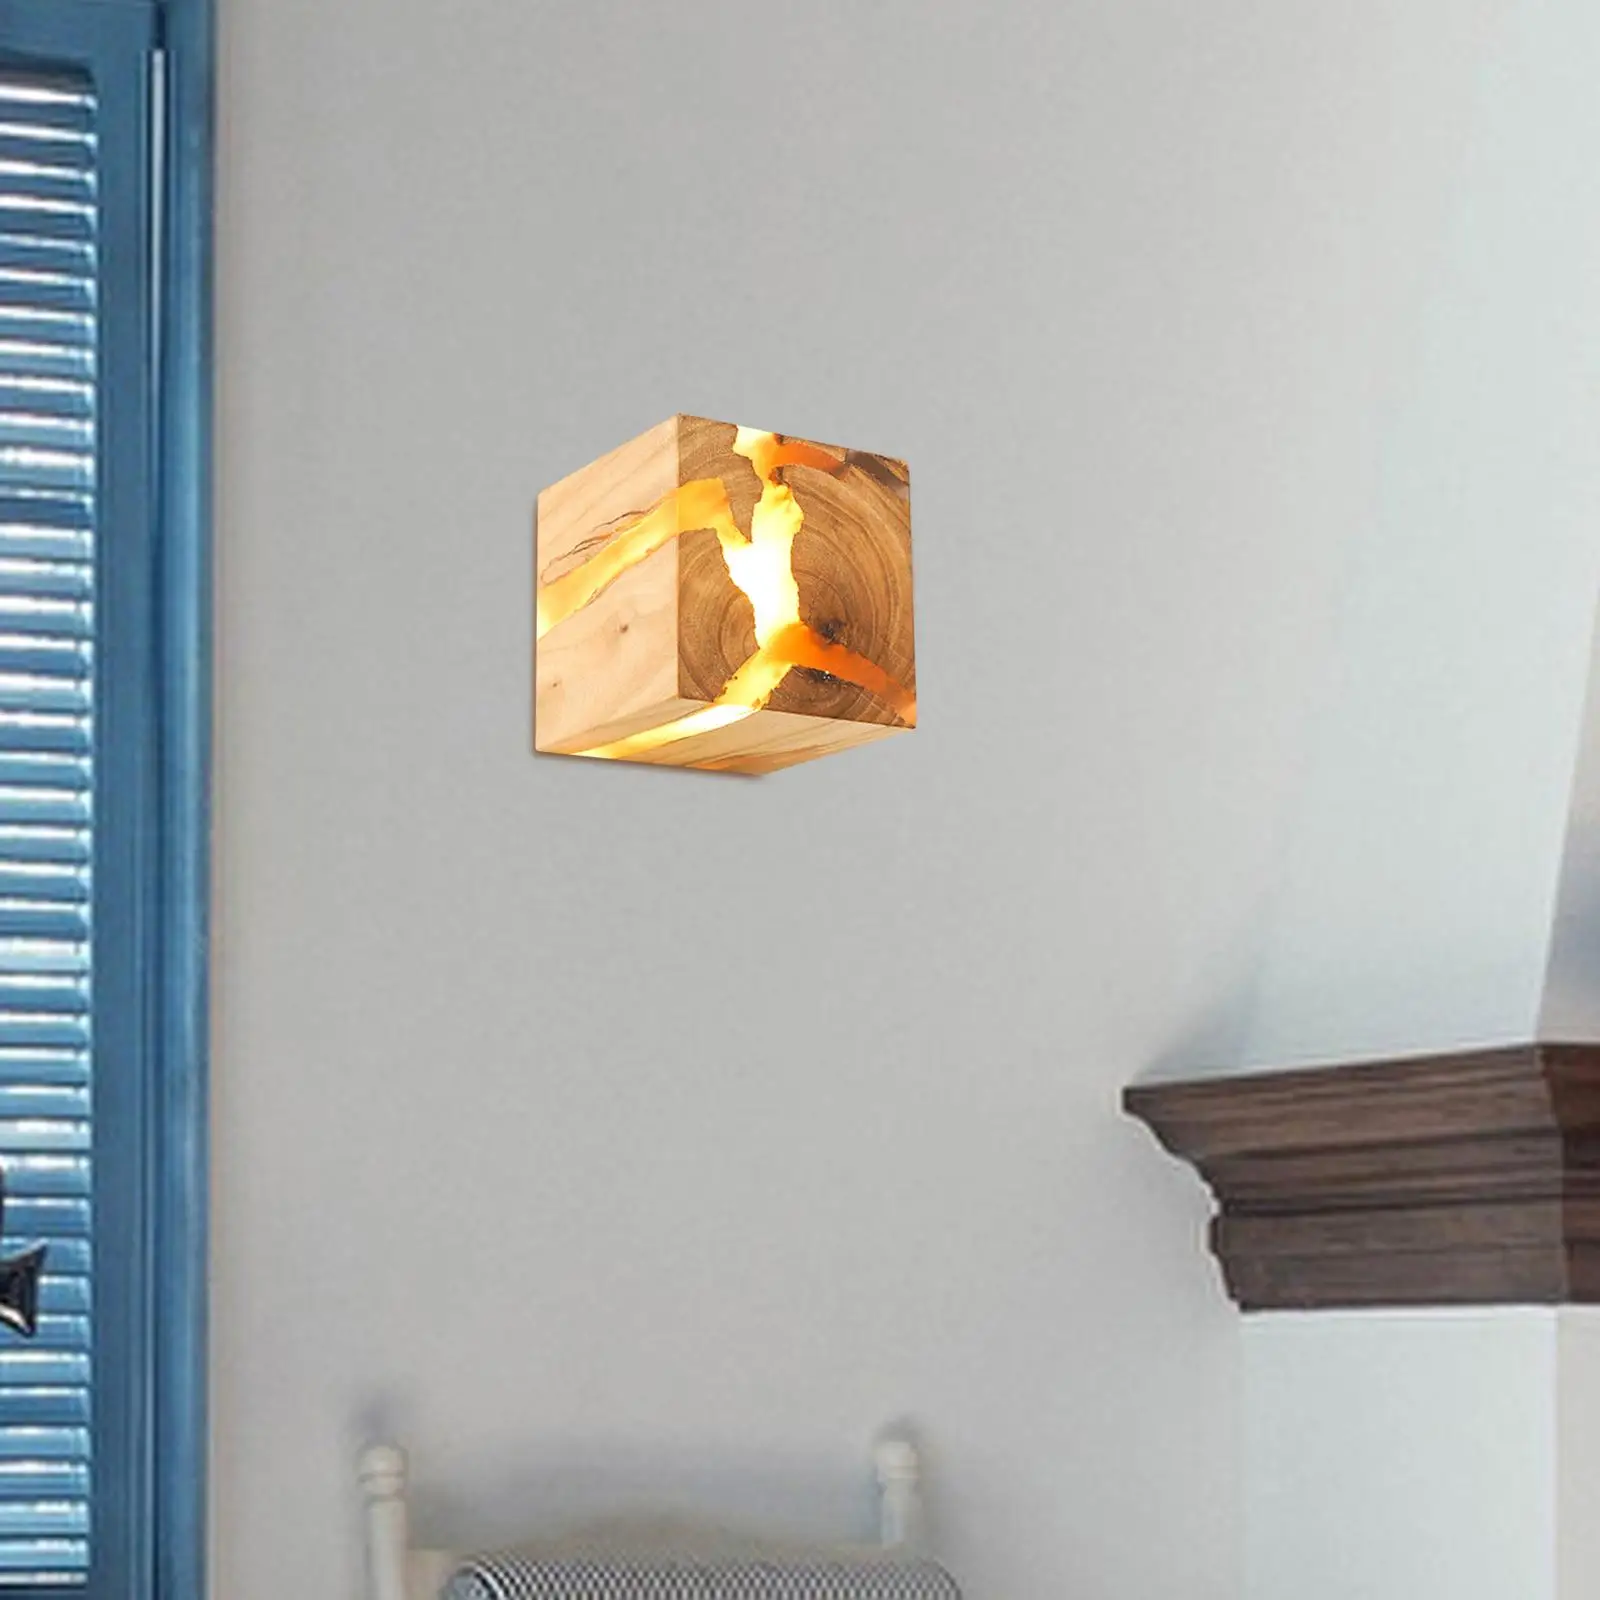 Wood Resin Wall Light Fashionable Decorative Square LED 5W Photo Prop Bedside Lamp for Hotel Cafe Home Restaurant Decor